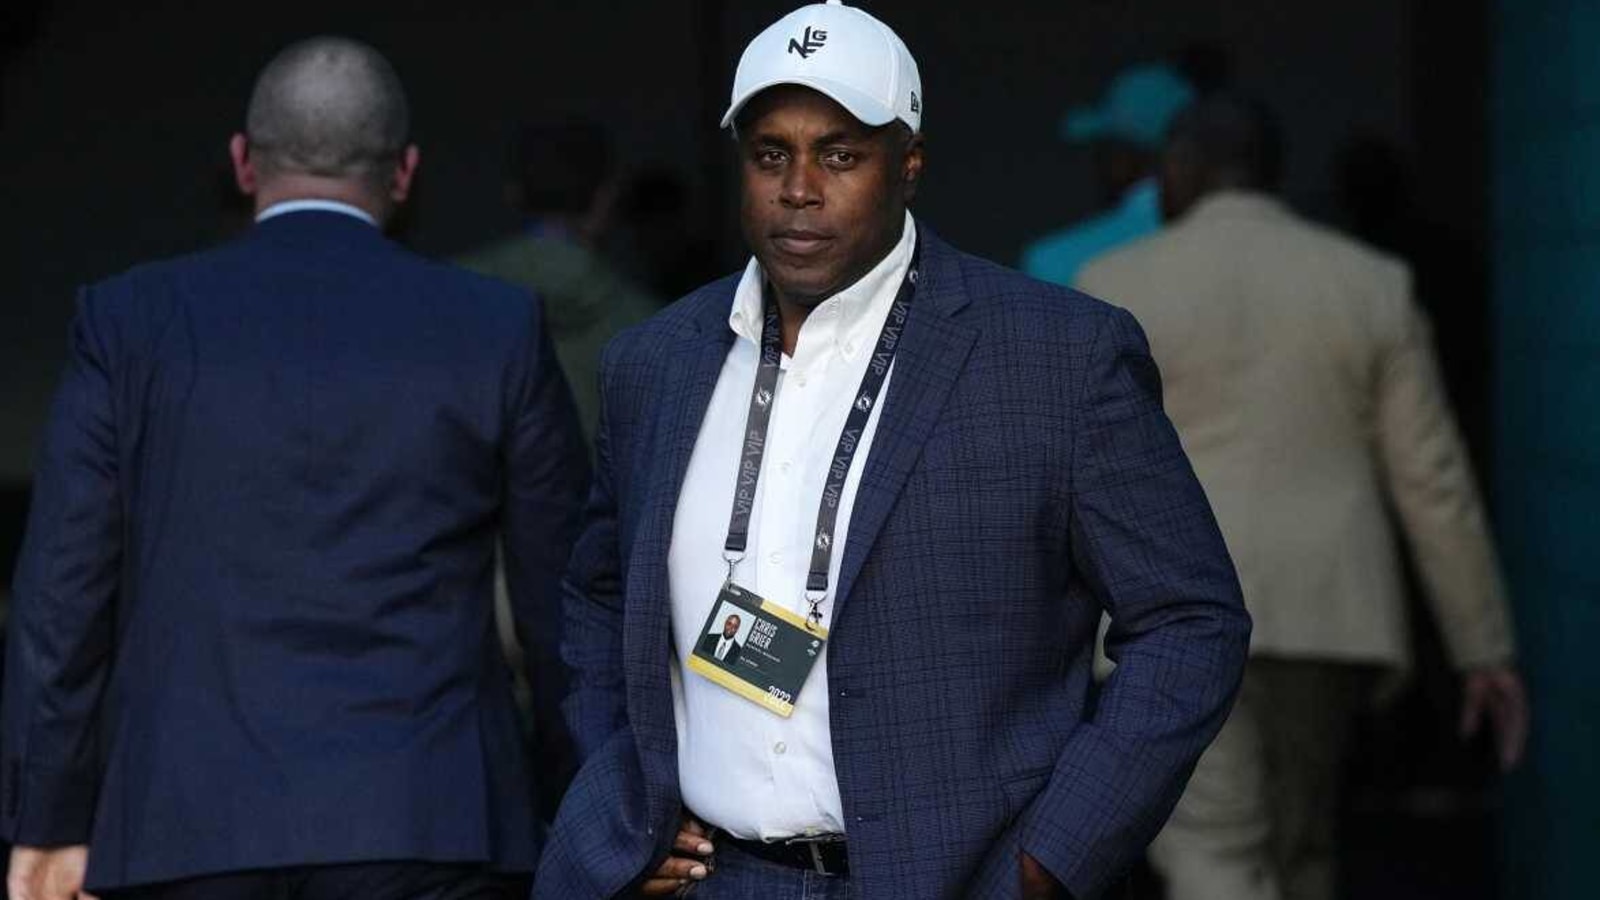 Miami Dolphins GM Chris Grier grades his roster building as mixed